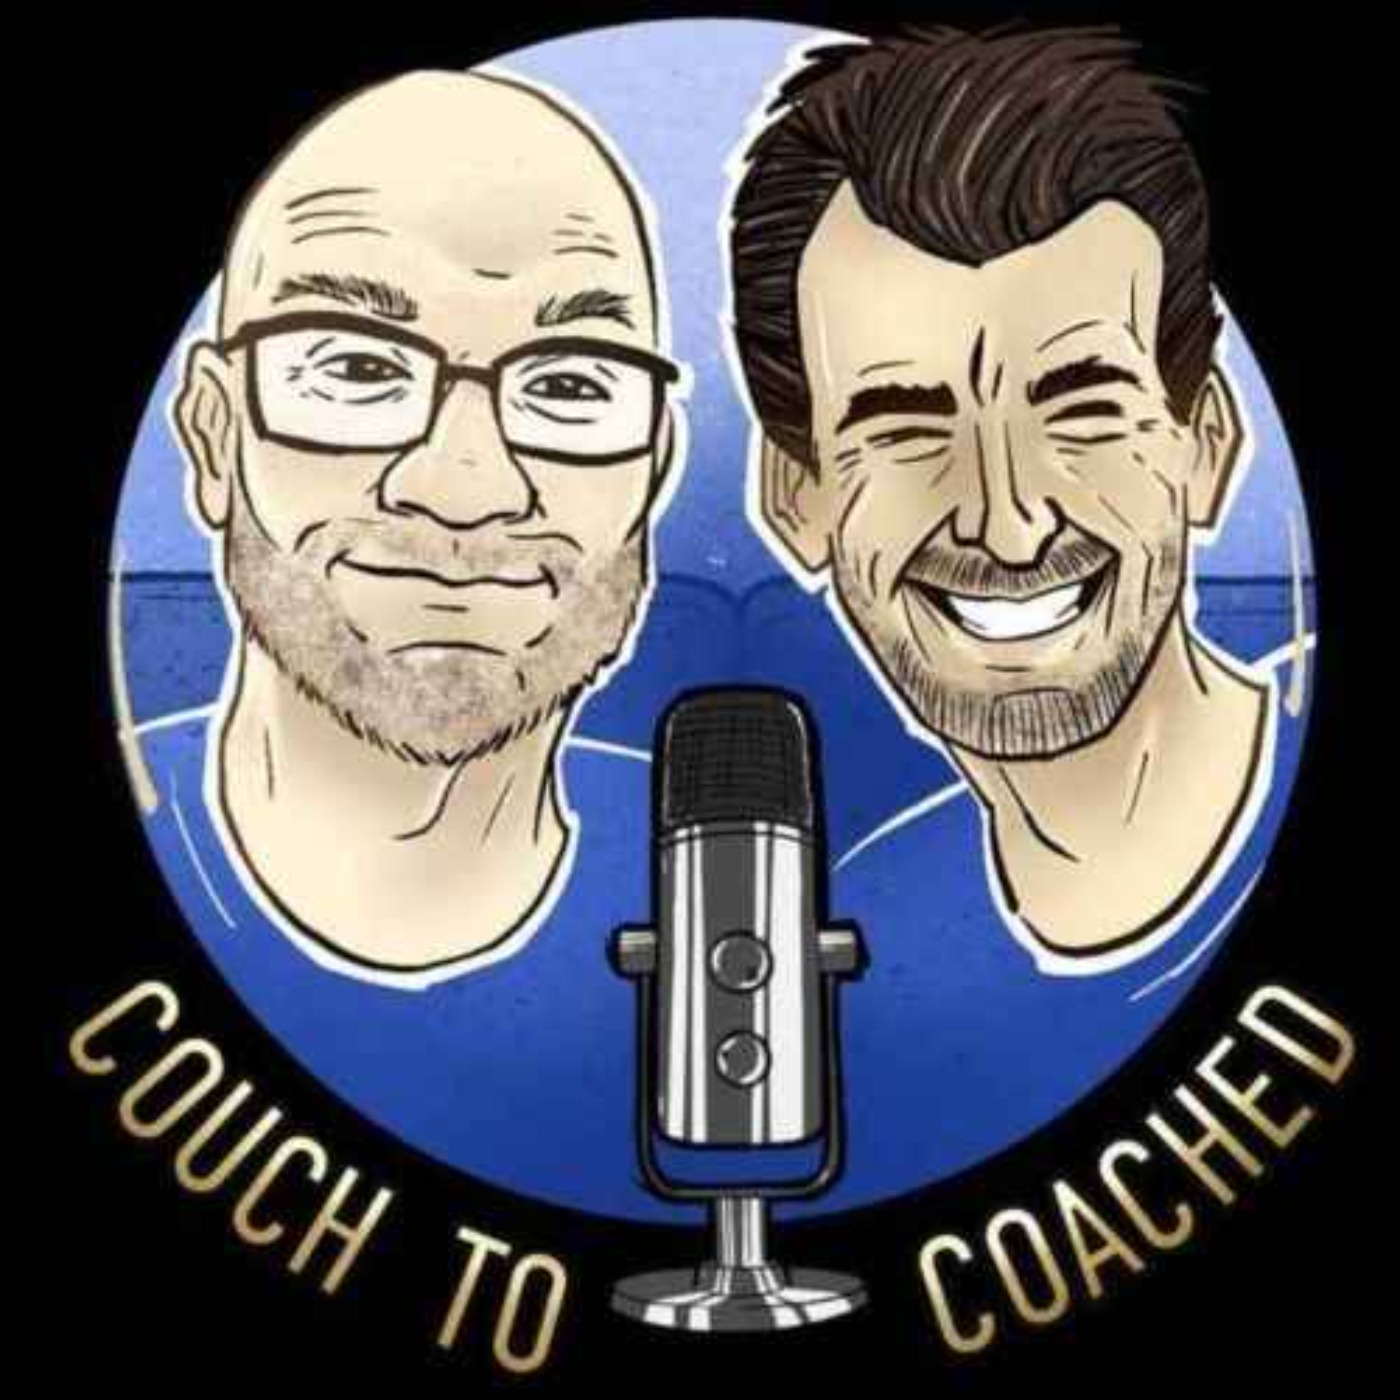 Couch to coached- Running Podcast Episode 84